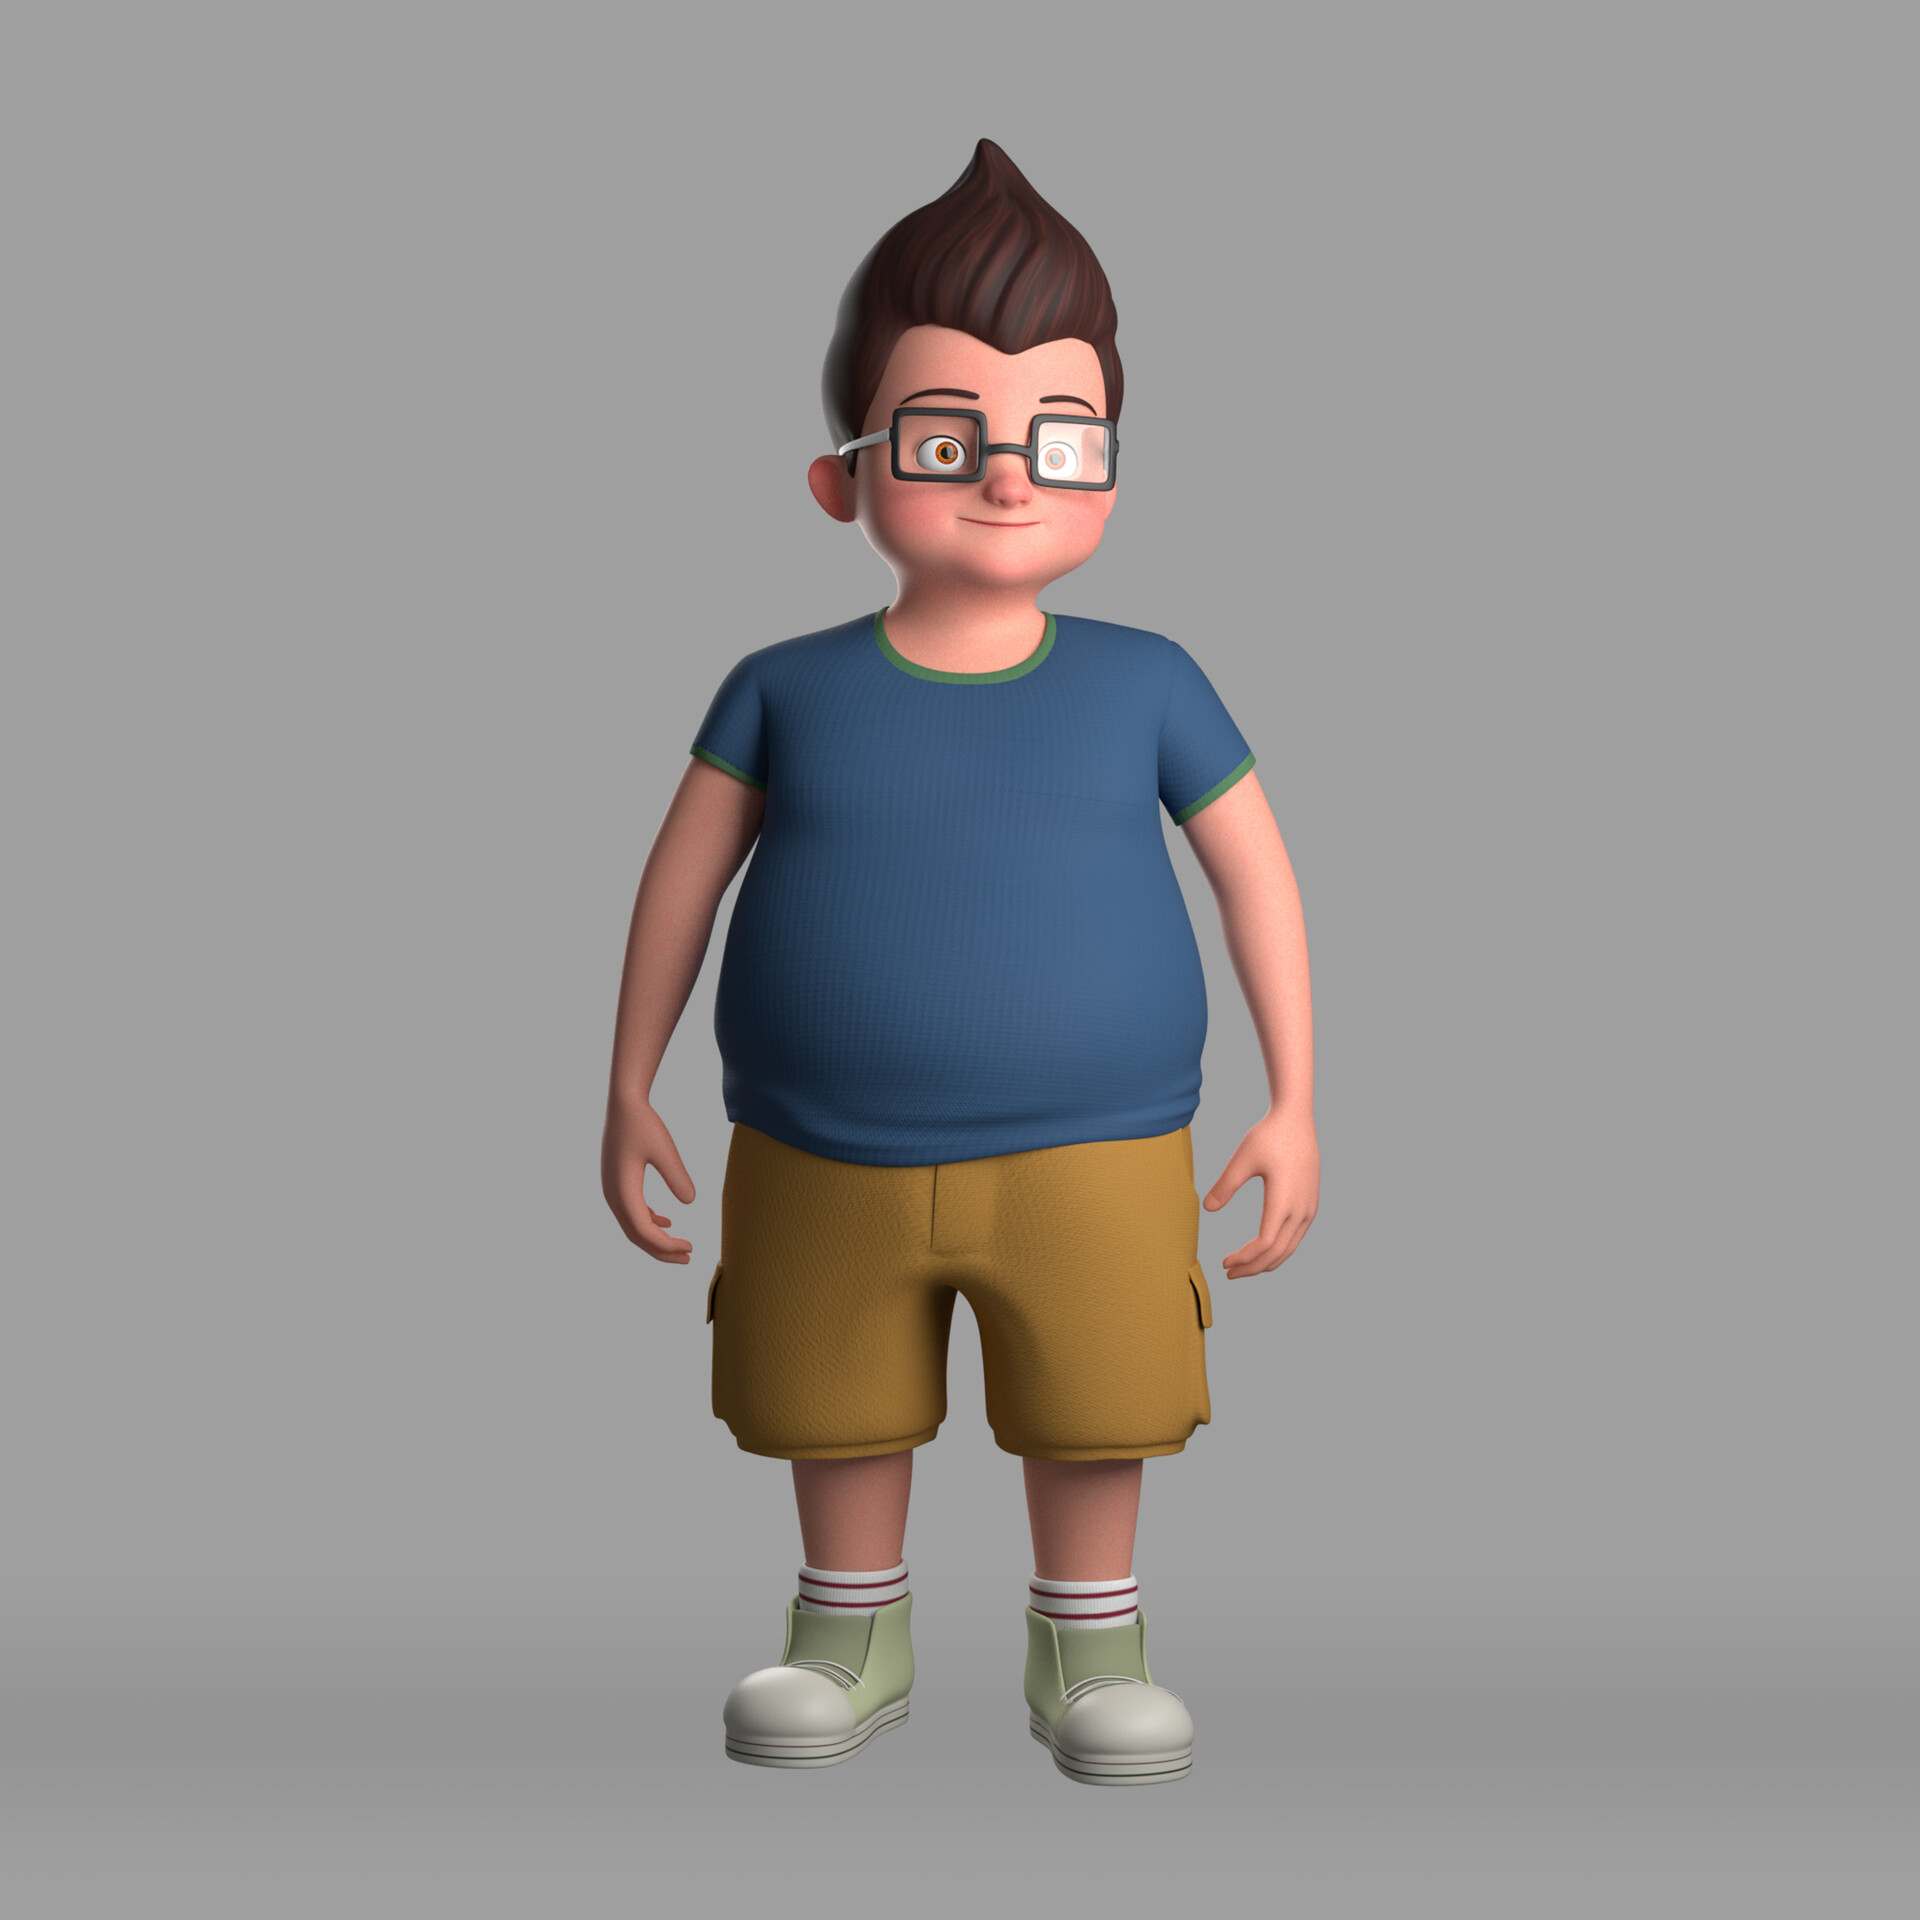 Anoop A - Young boy stylized cartoon character